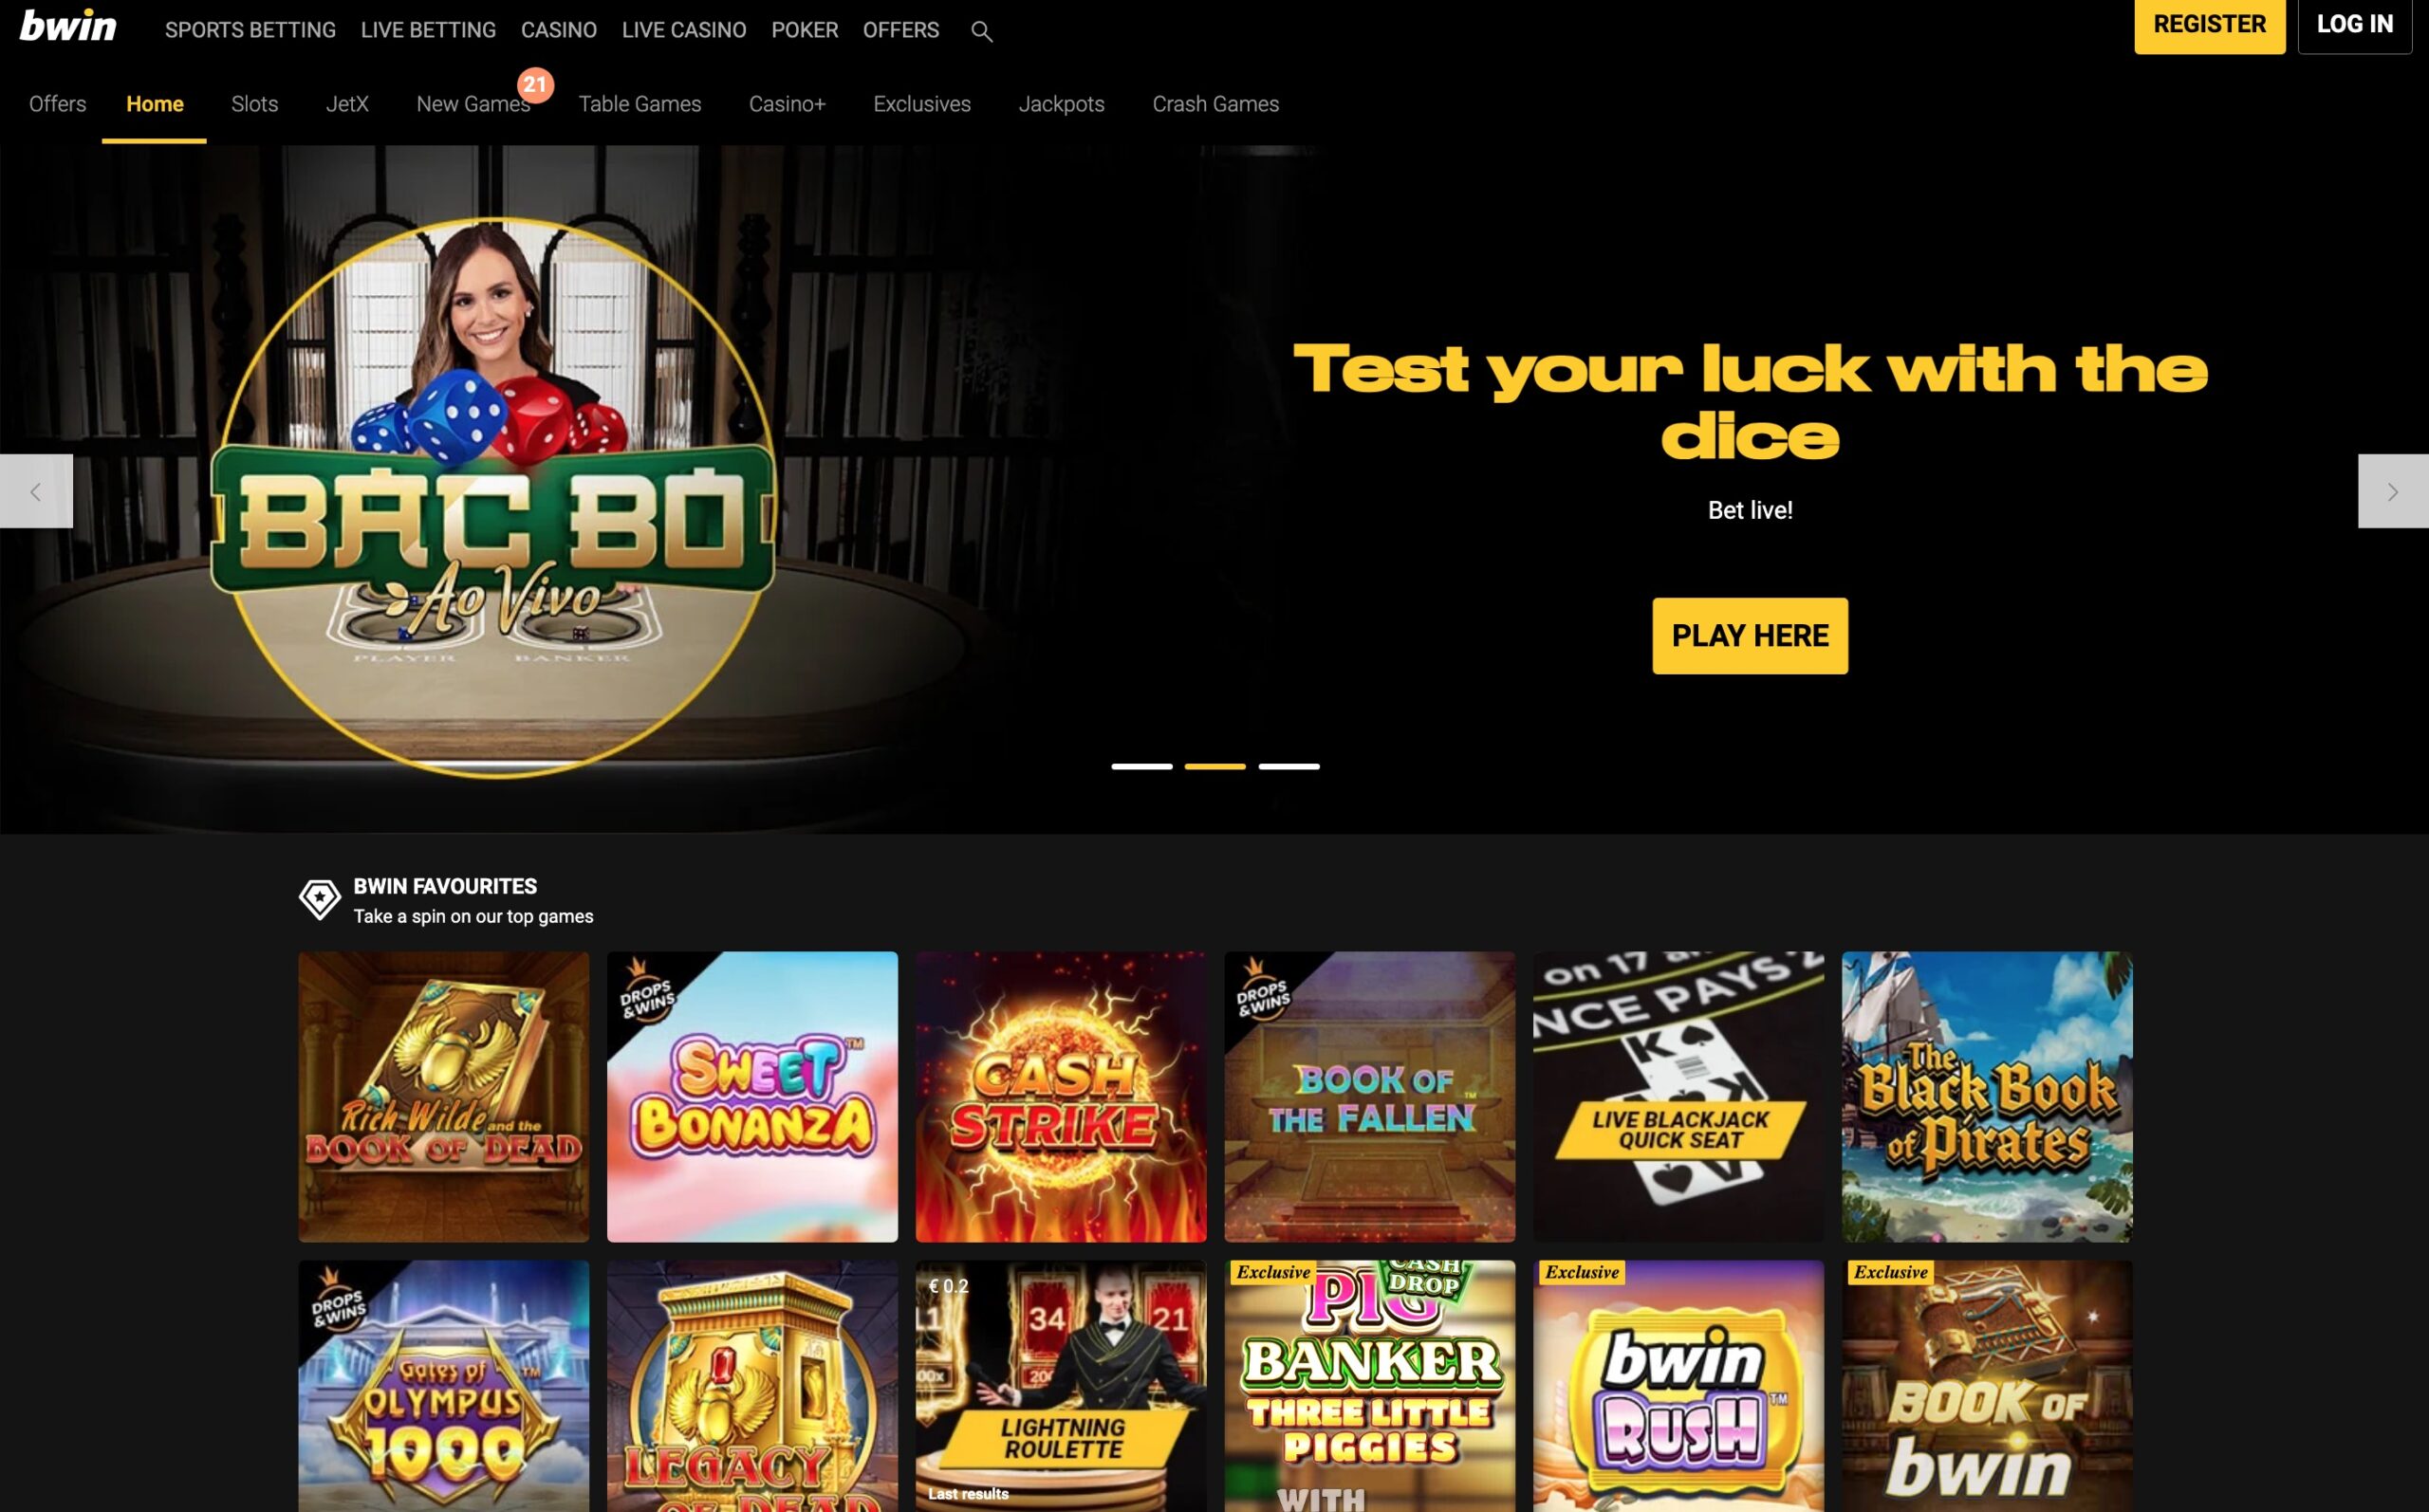 Overview of Bwin Casino